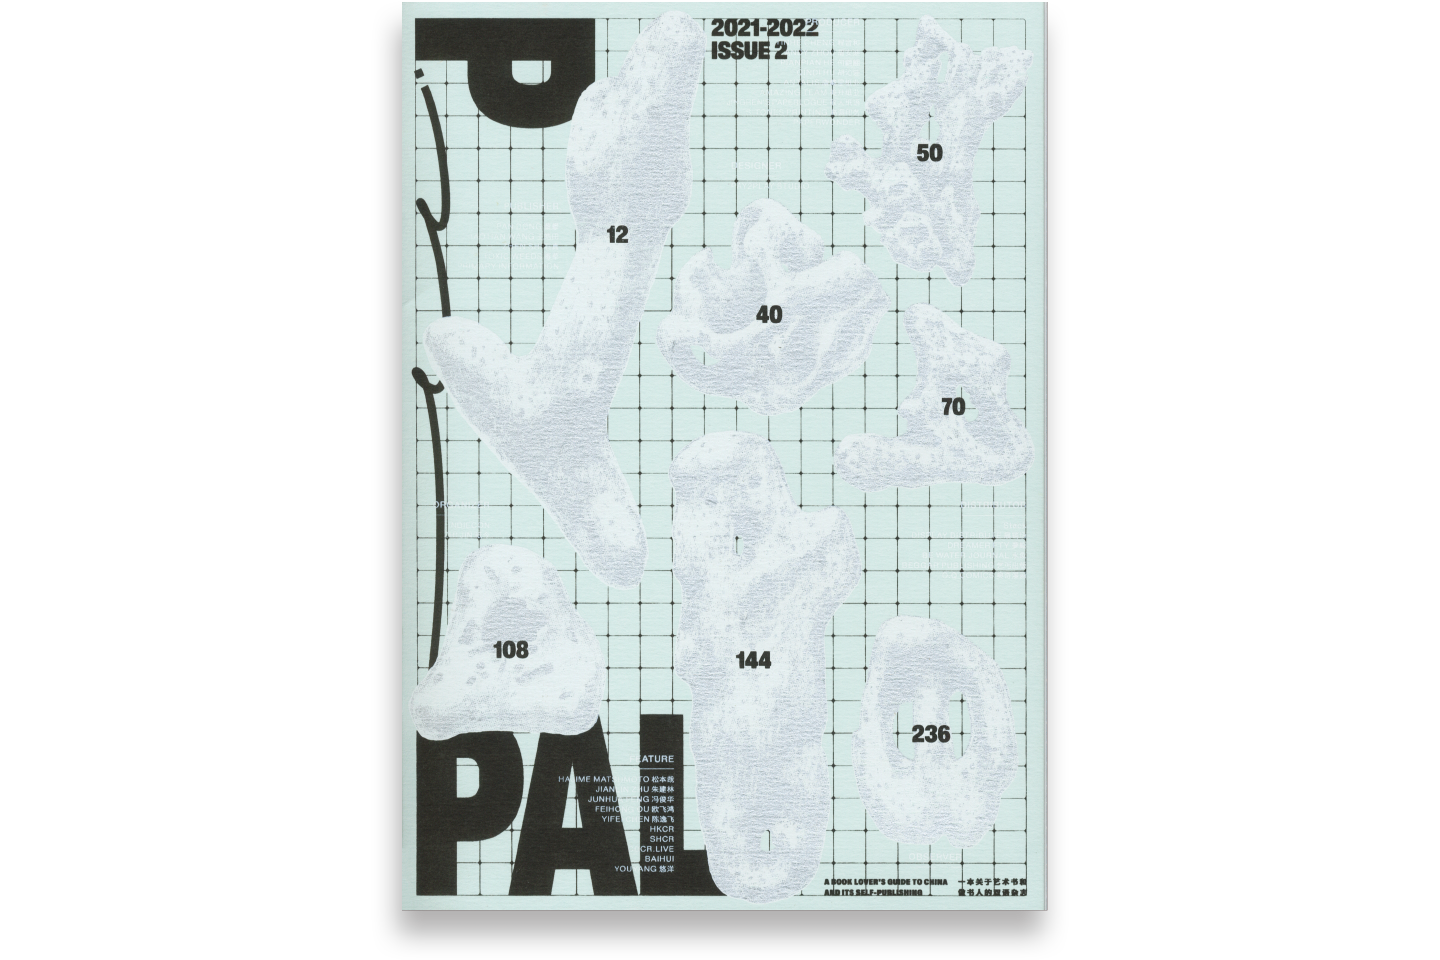 P_PAL ISSUE 2 2021-2022